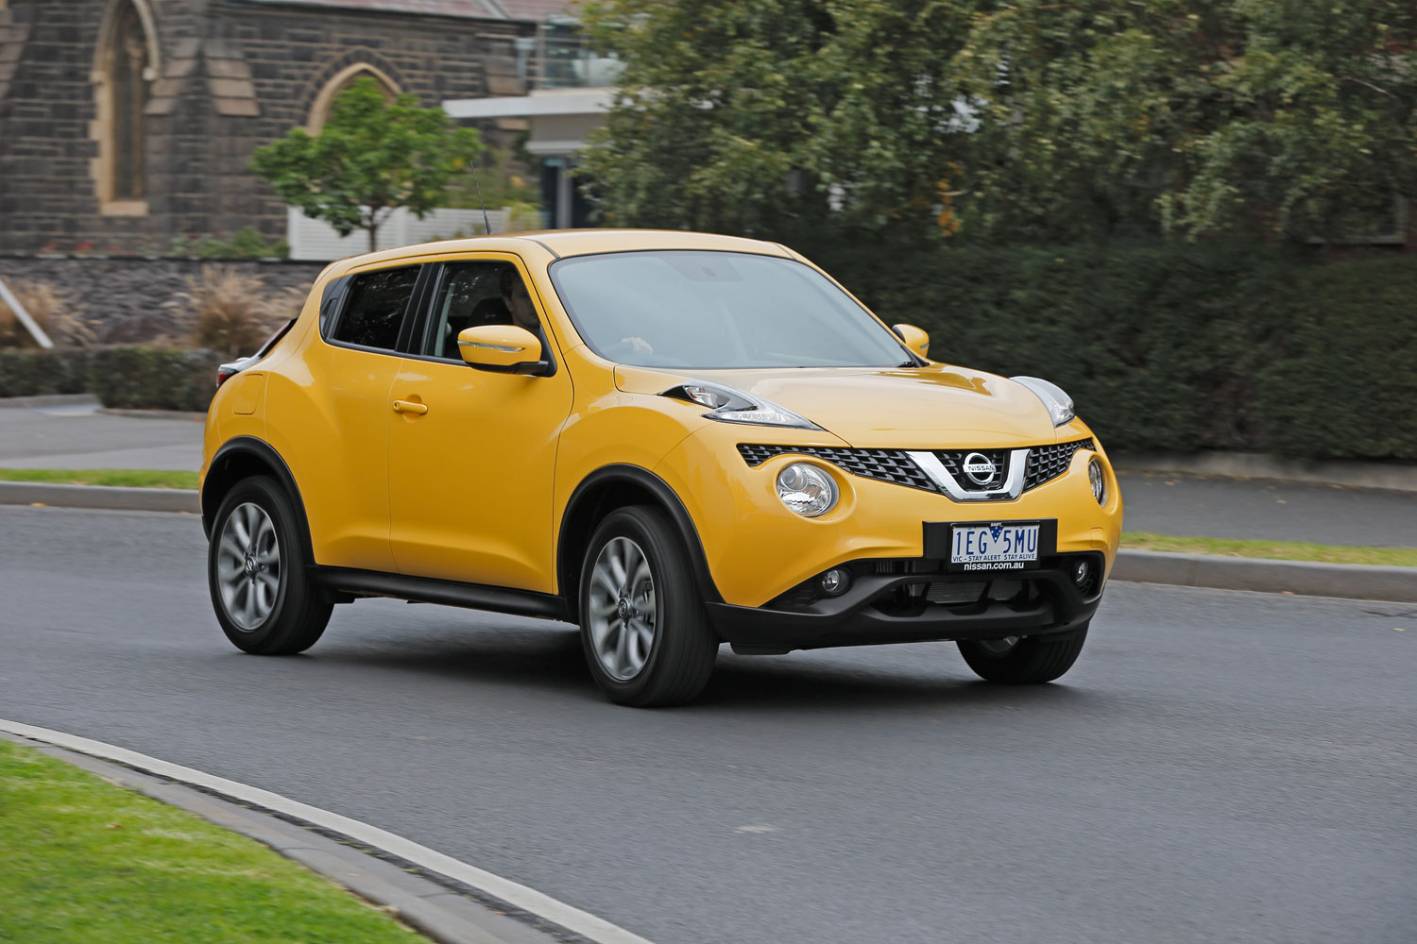 Review - 2015 Nissan Juke Review and First Drive